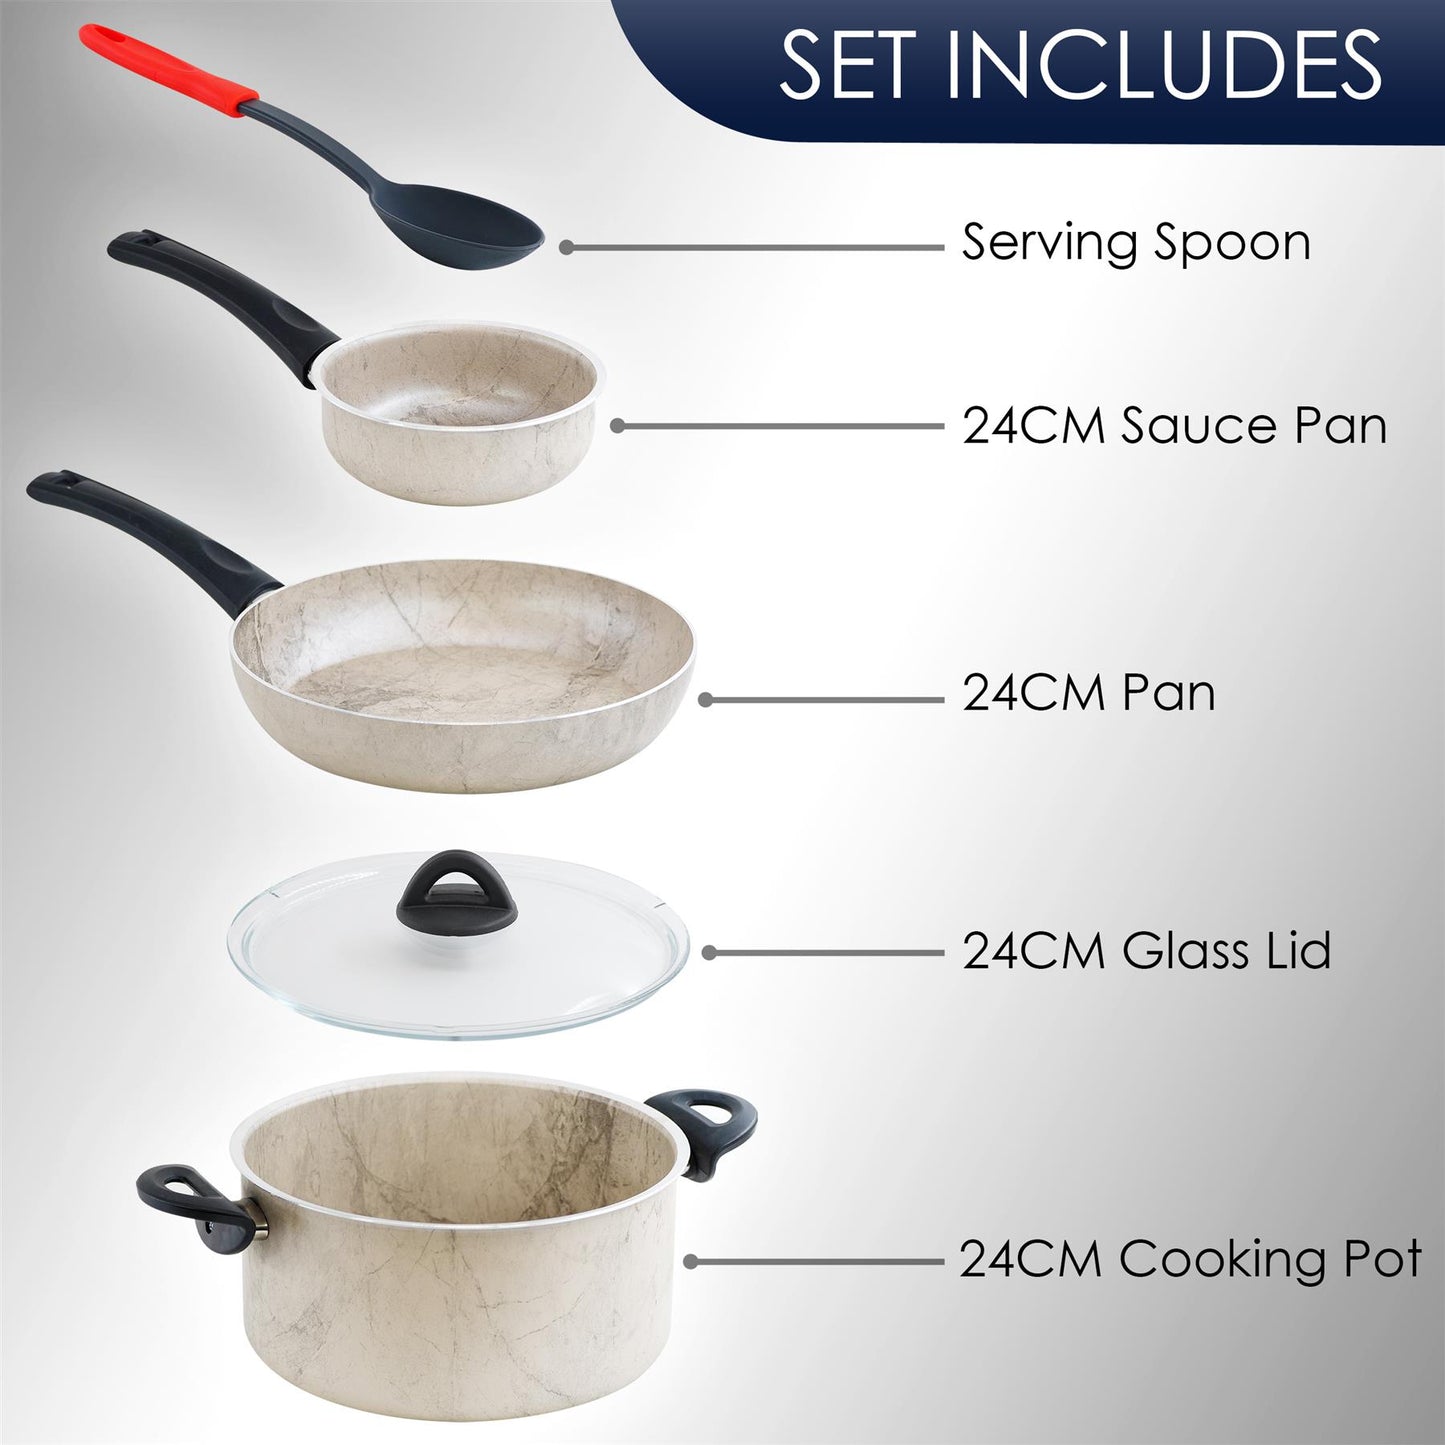 Cream 5 pc Non-Stick Pots and Pans Set by Geezy - UKBuyZone